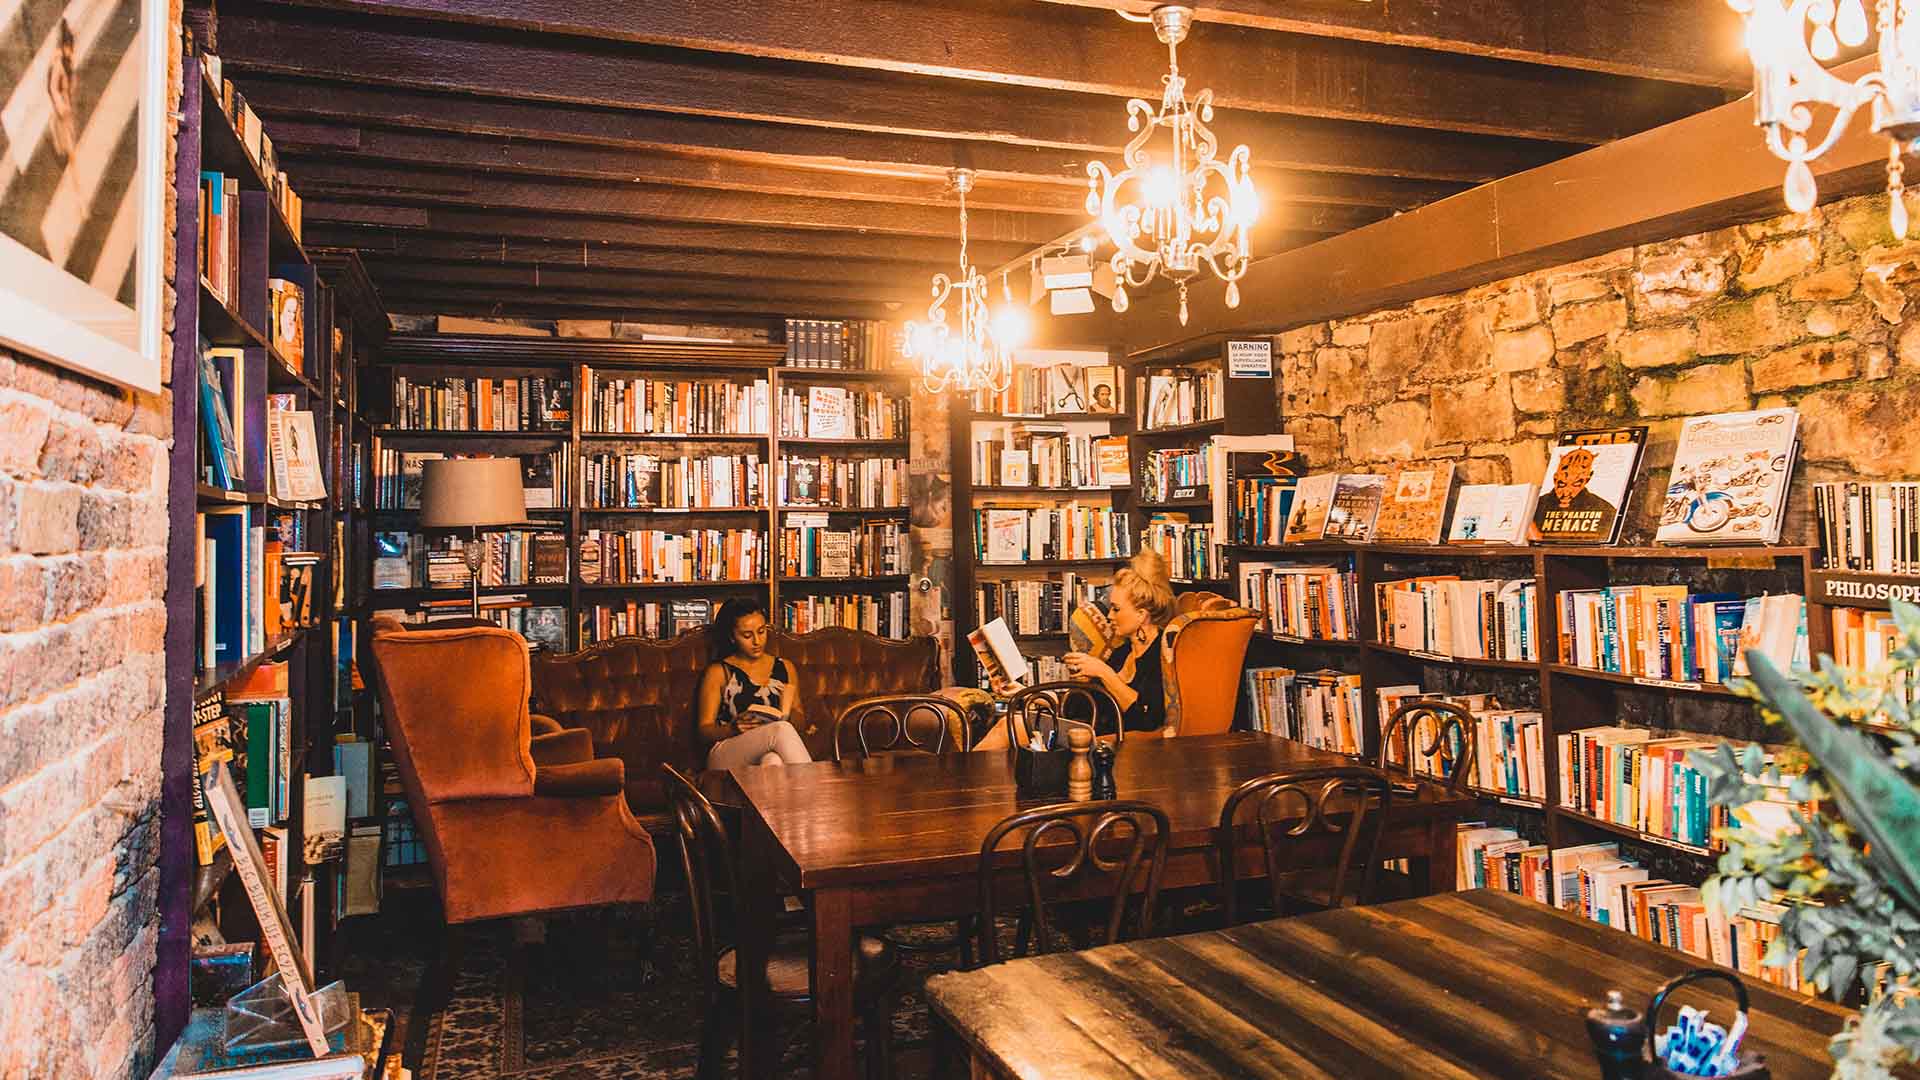 Ampersand Cafe & Bookstore